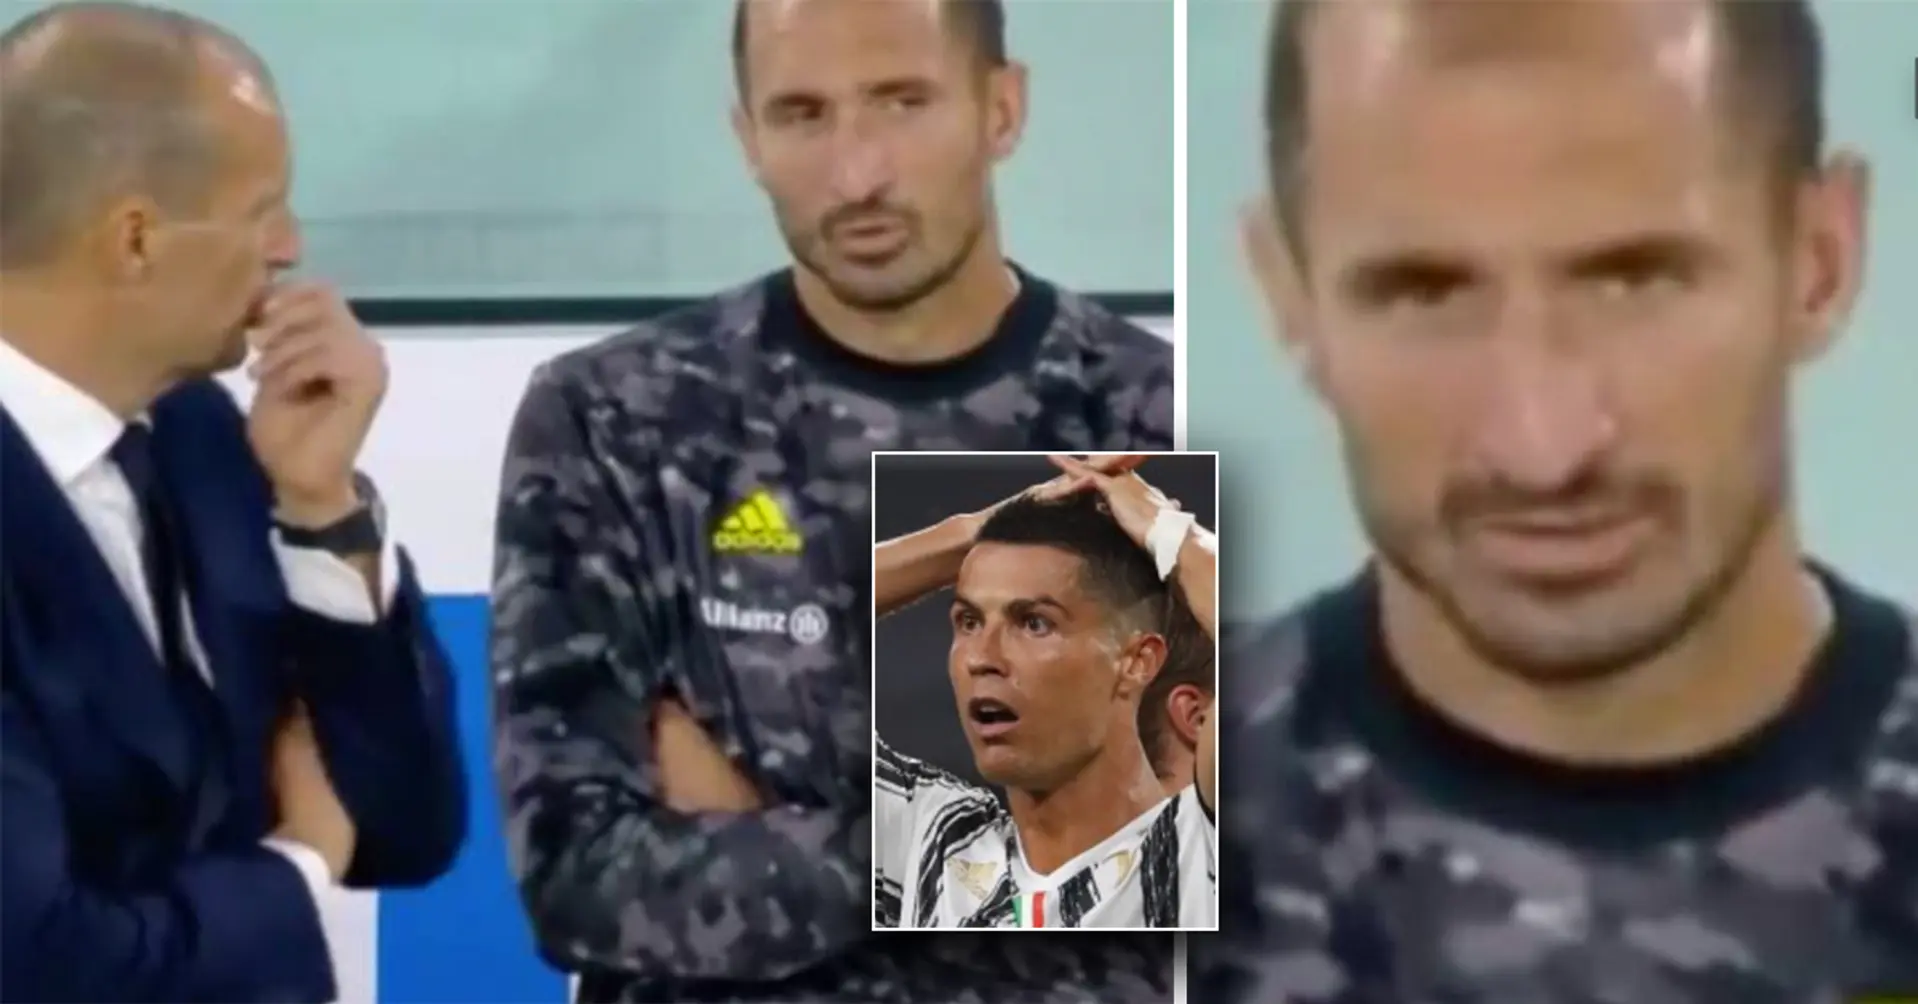 Caught on camera: Giorgio Chiellini speaks about Juve squad after Cristiano's departure